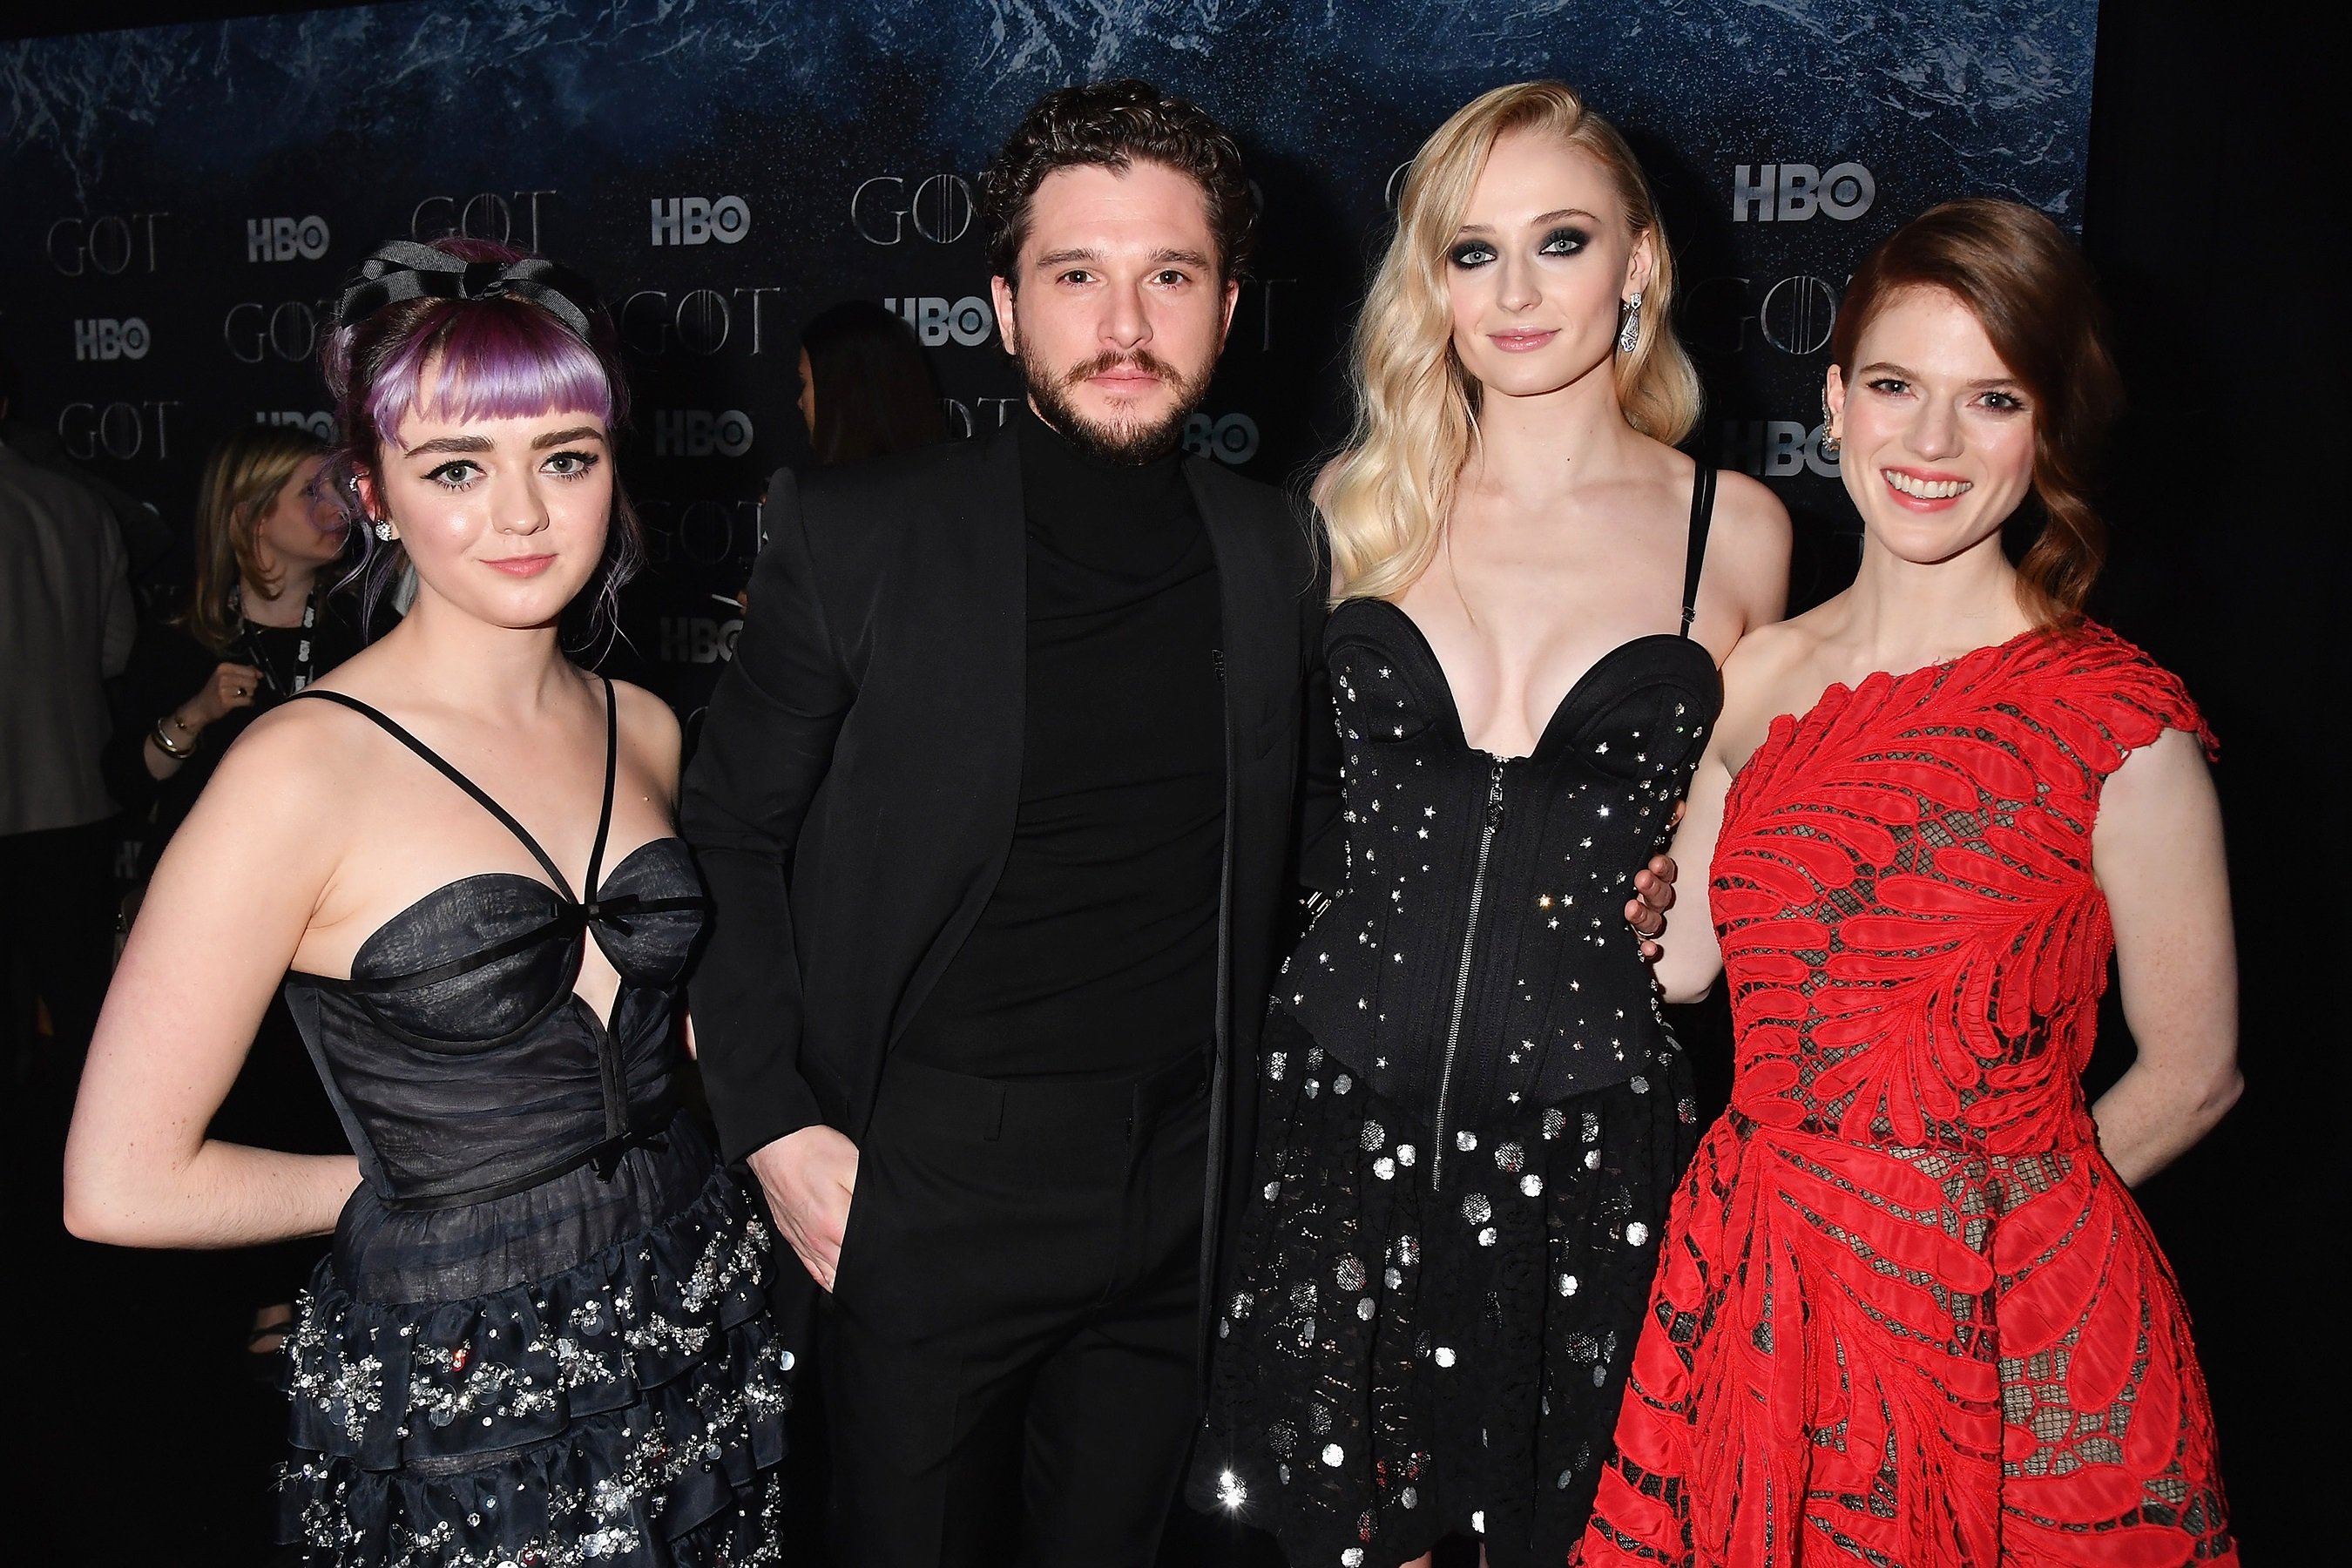 game of thrones actors among amazon s lord of the rings cast